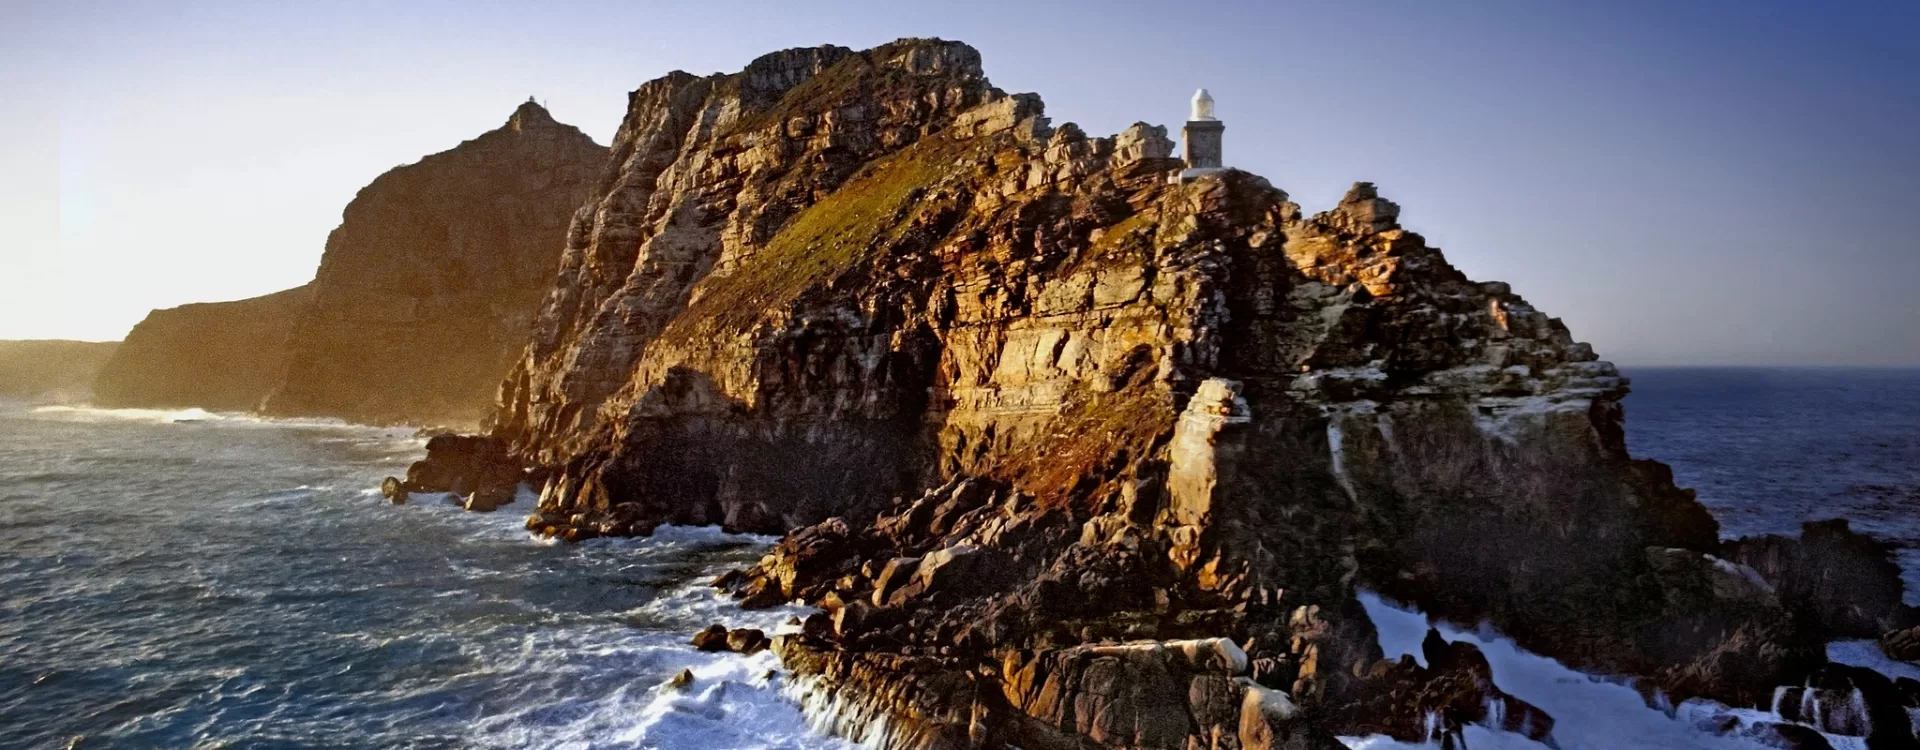 Cape of Good Hope Private Tour